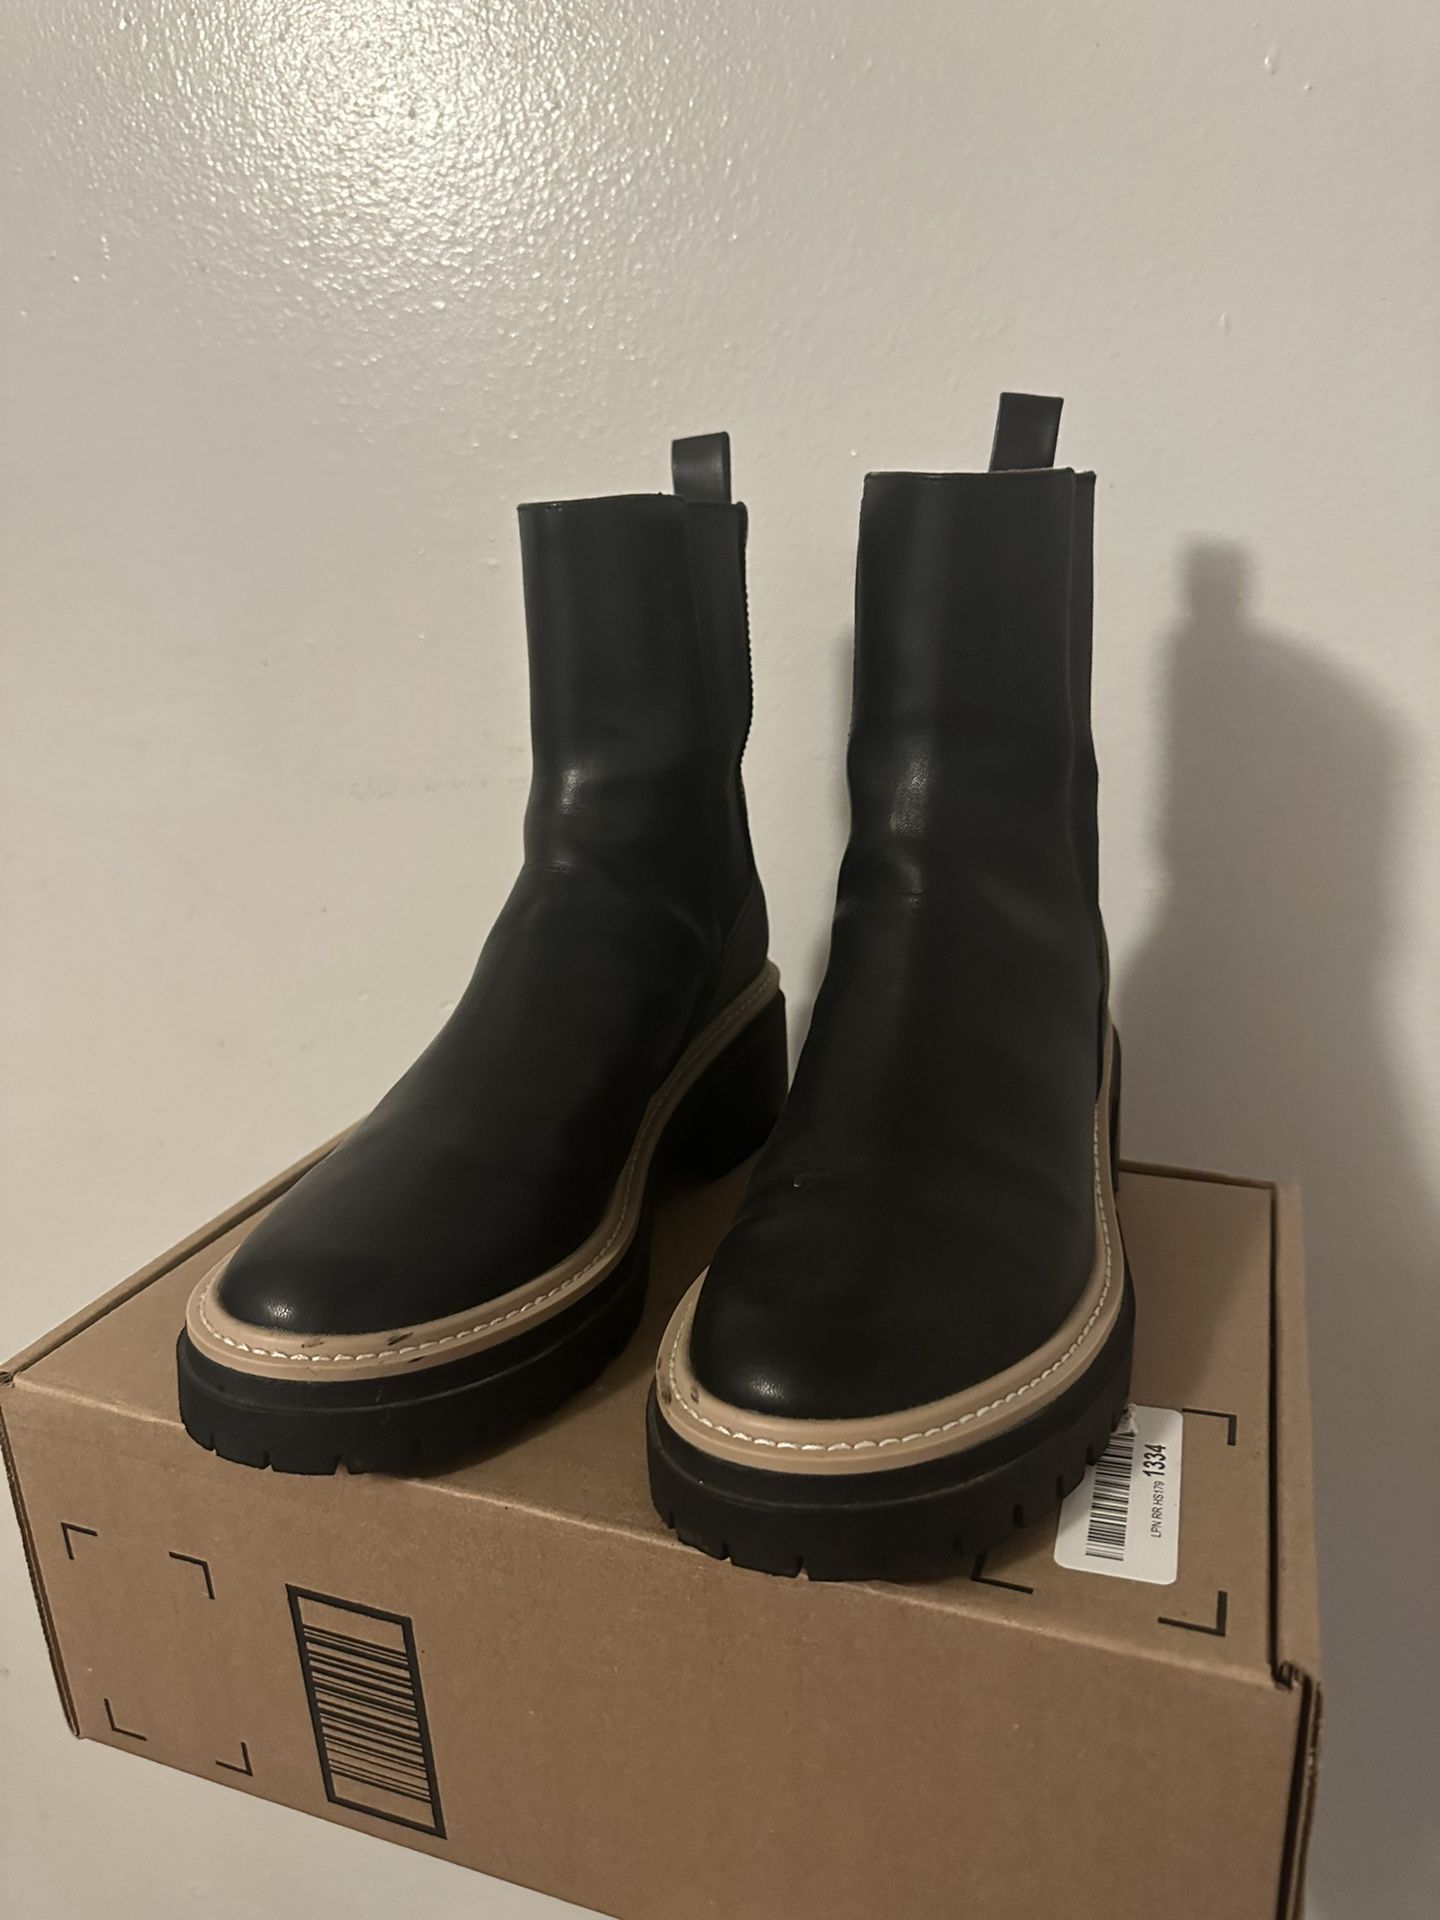 Black Boots With Tan Strip 